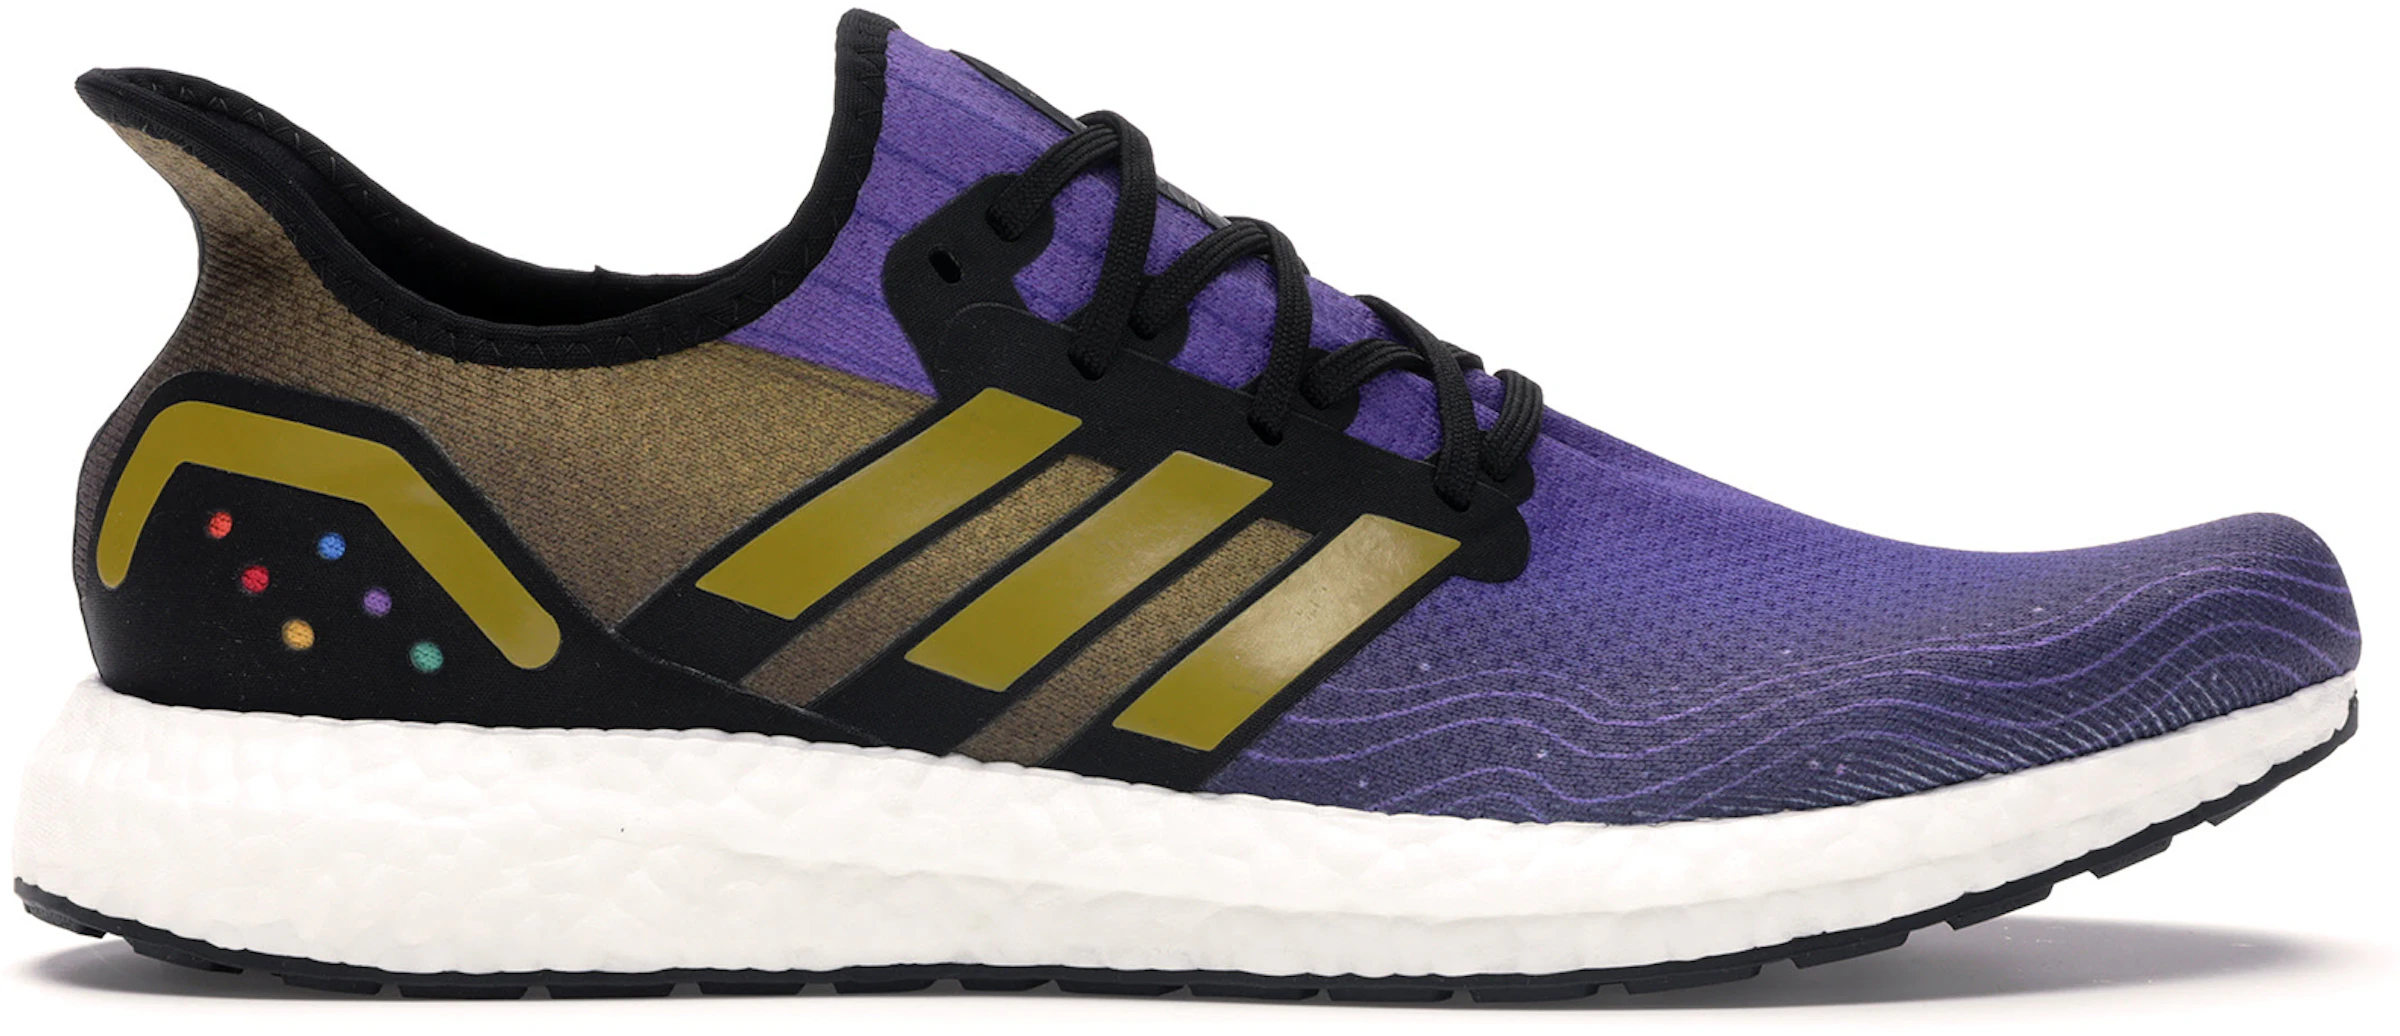 Total 66+ imagen adidas thanos shoes